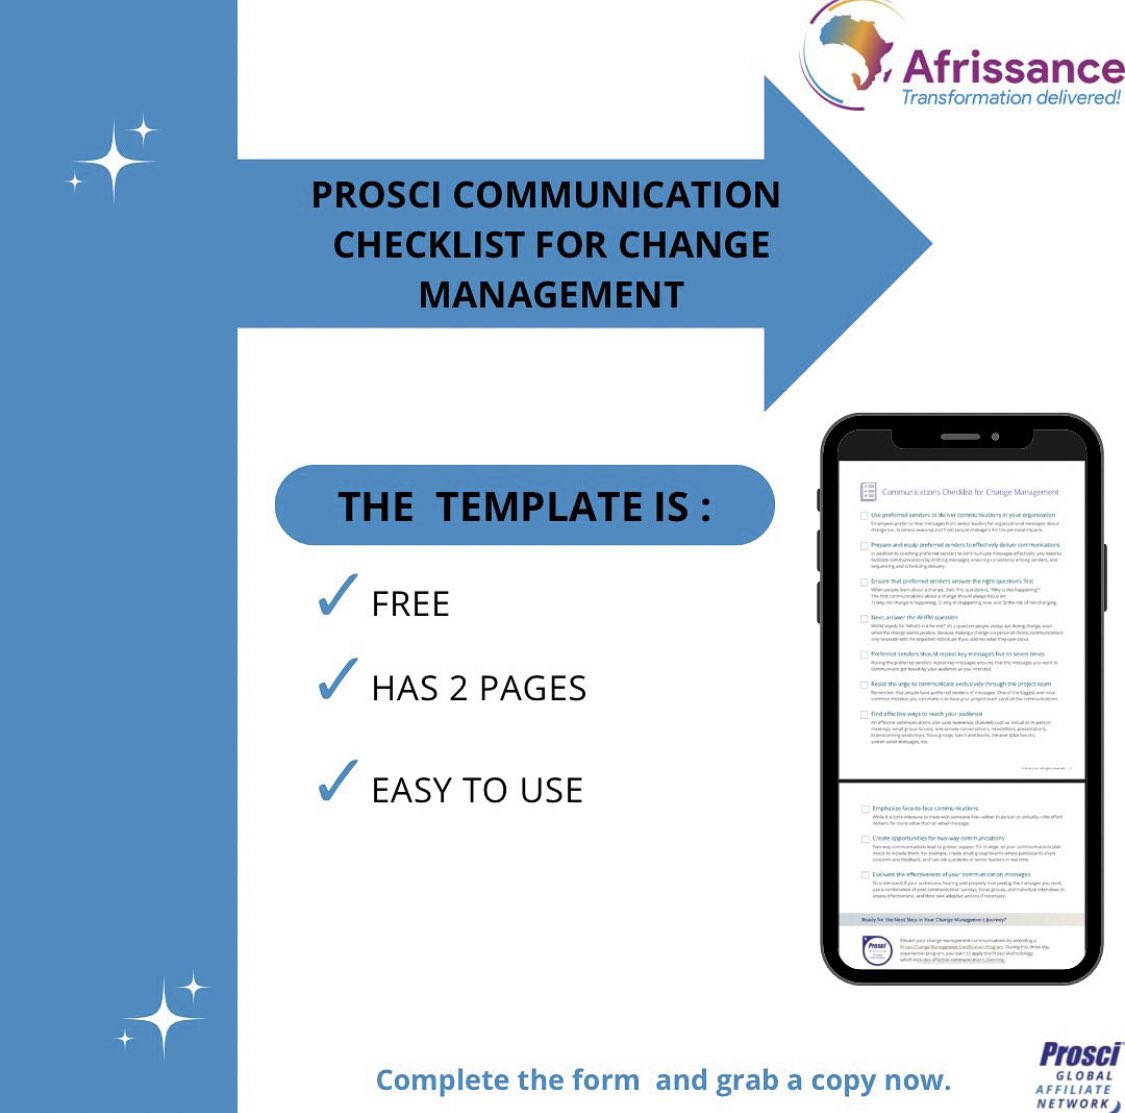 Prosci’s communication checklist offers a high-level guide in the development of a new communication plan or evaluating the effectiveness of a current communication plan.
Complete this form to access the Prosci checklist for free share.hsforms.com/18PnOkEEhTcm16…
#communicationplan